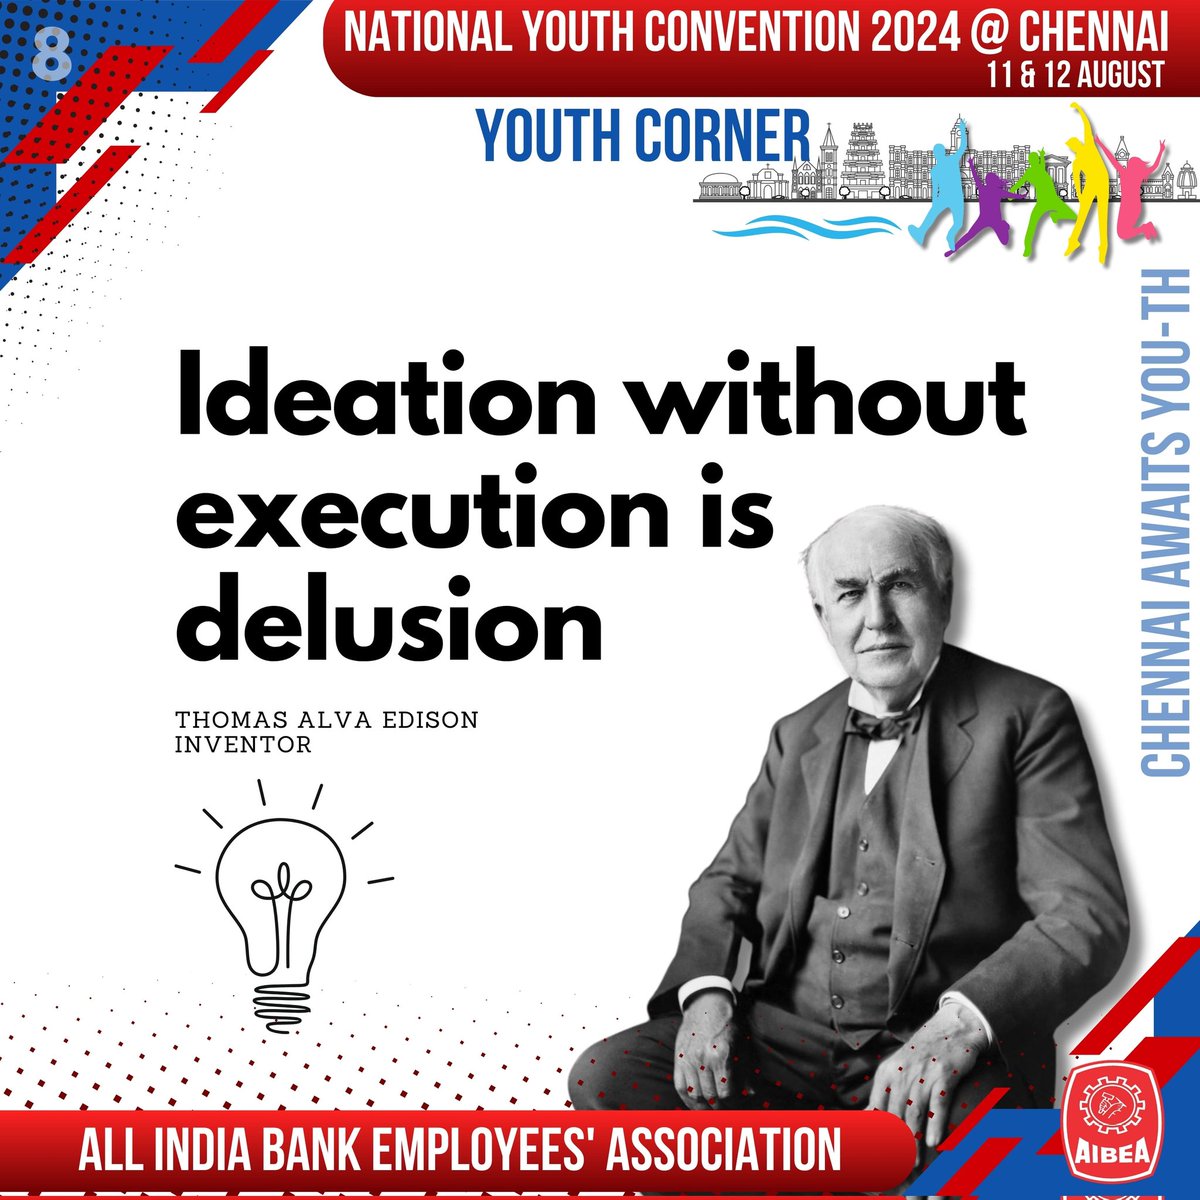 National Youth Convention 2024 @ Chennai 11 & 12 AUGUST

#AIBEA
#YOUTH
#CONVENTION